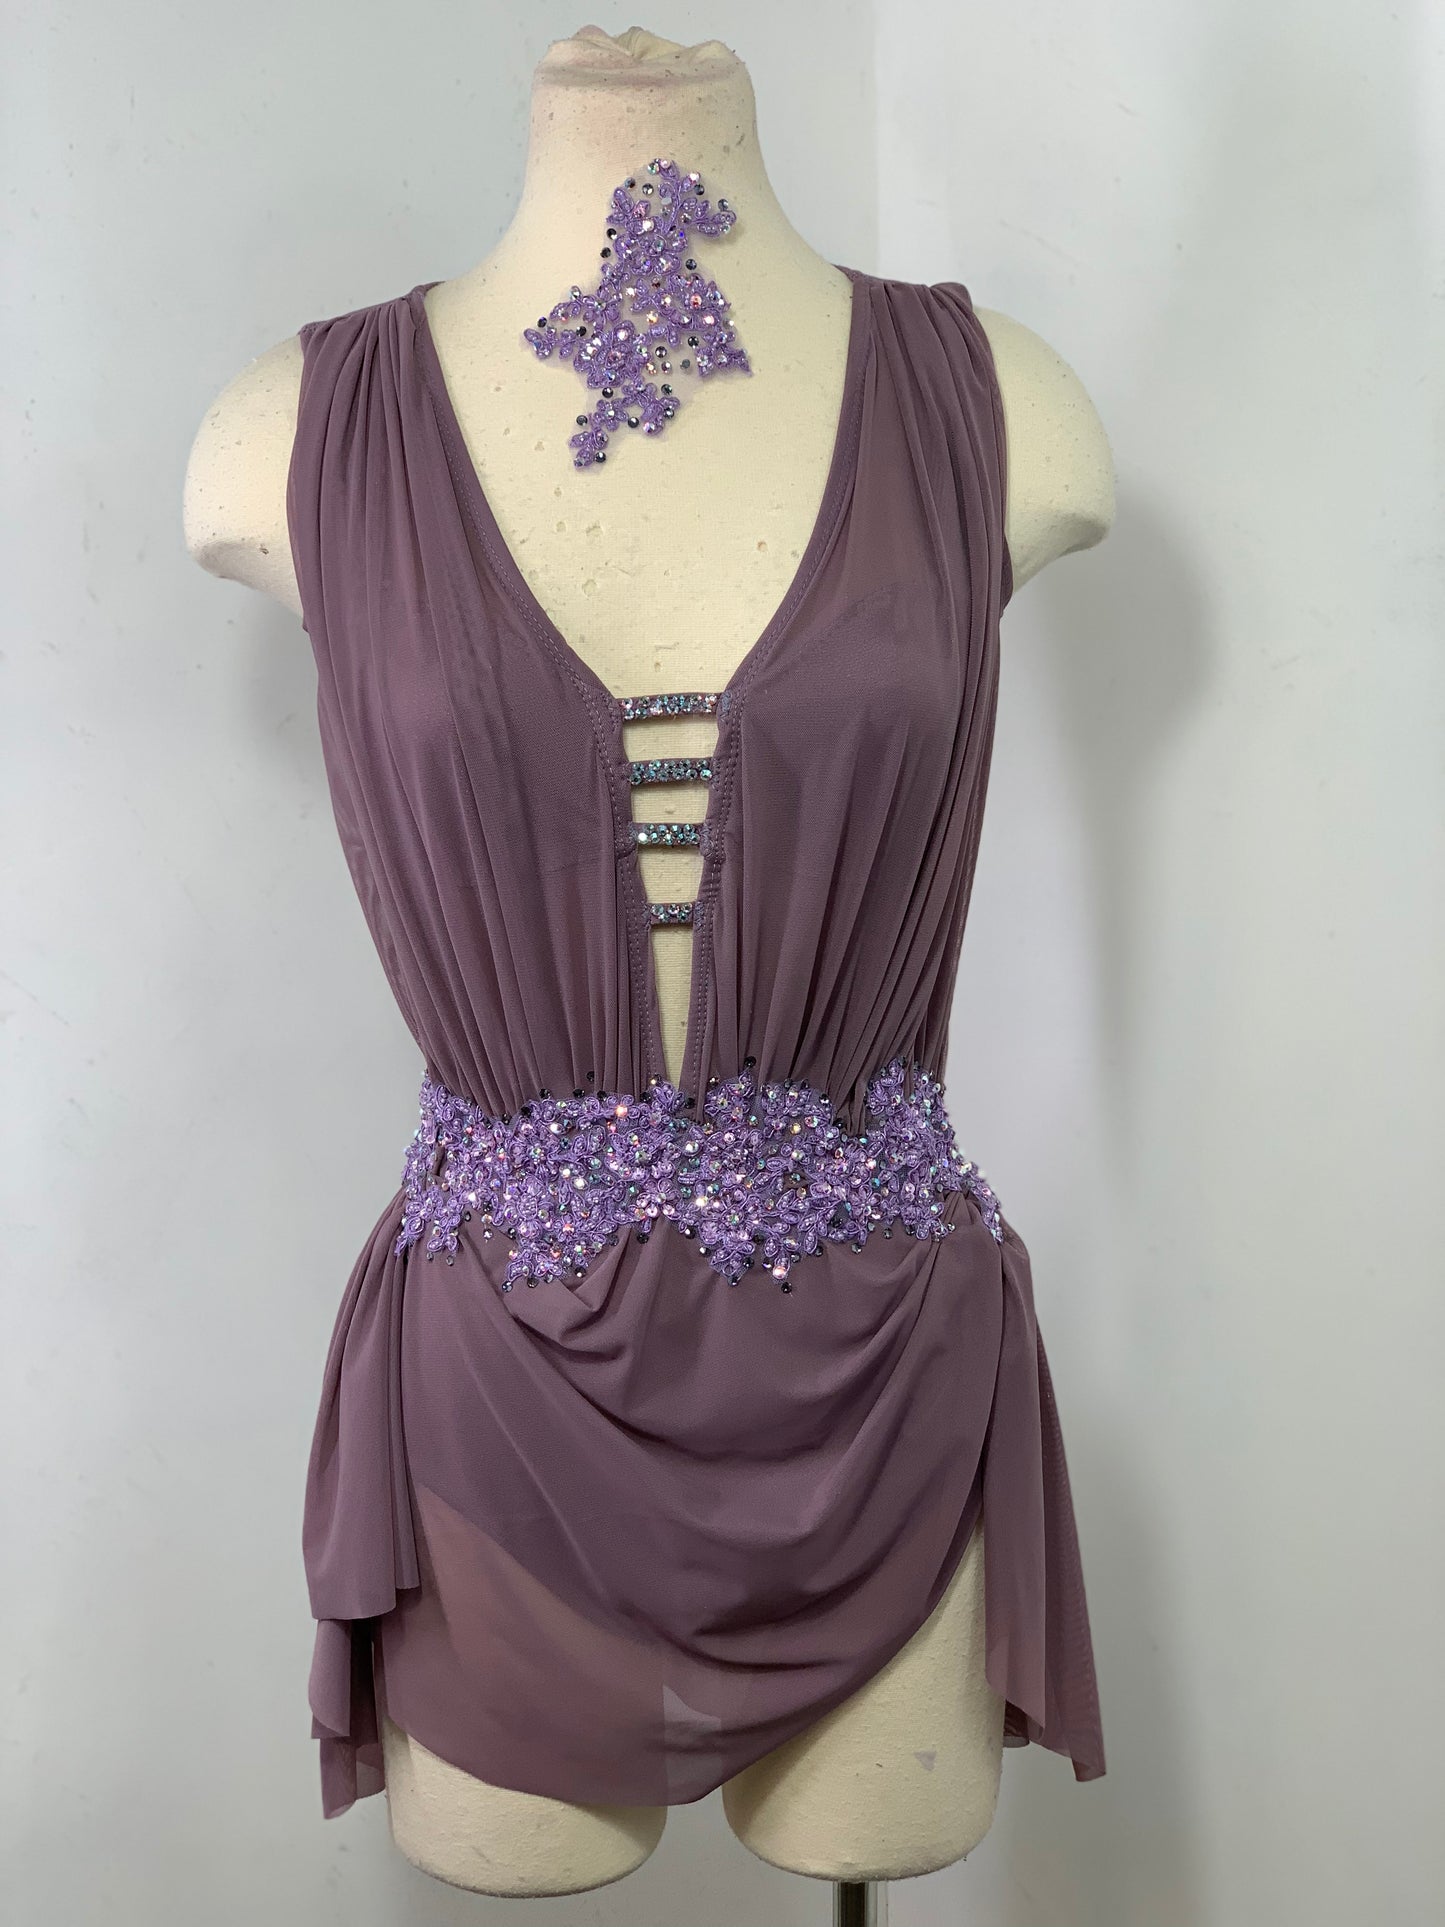 Dusty Amethyst draped Sage costume with crystal ab stones and appliques